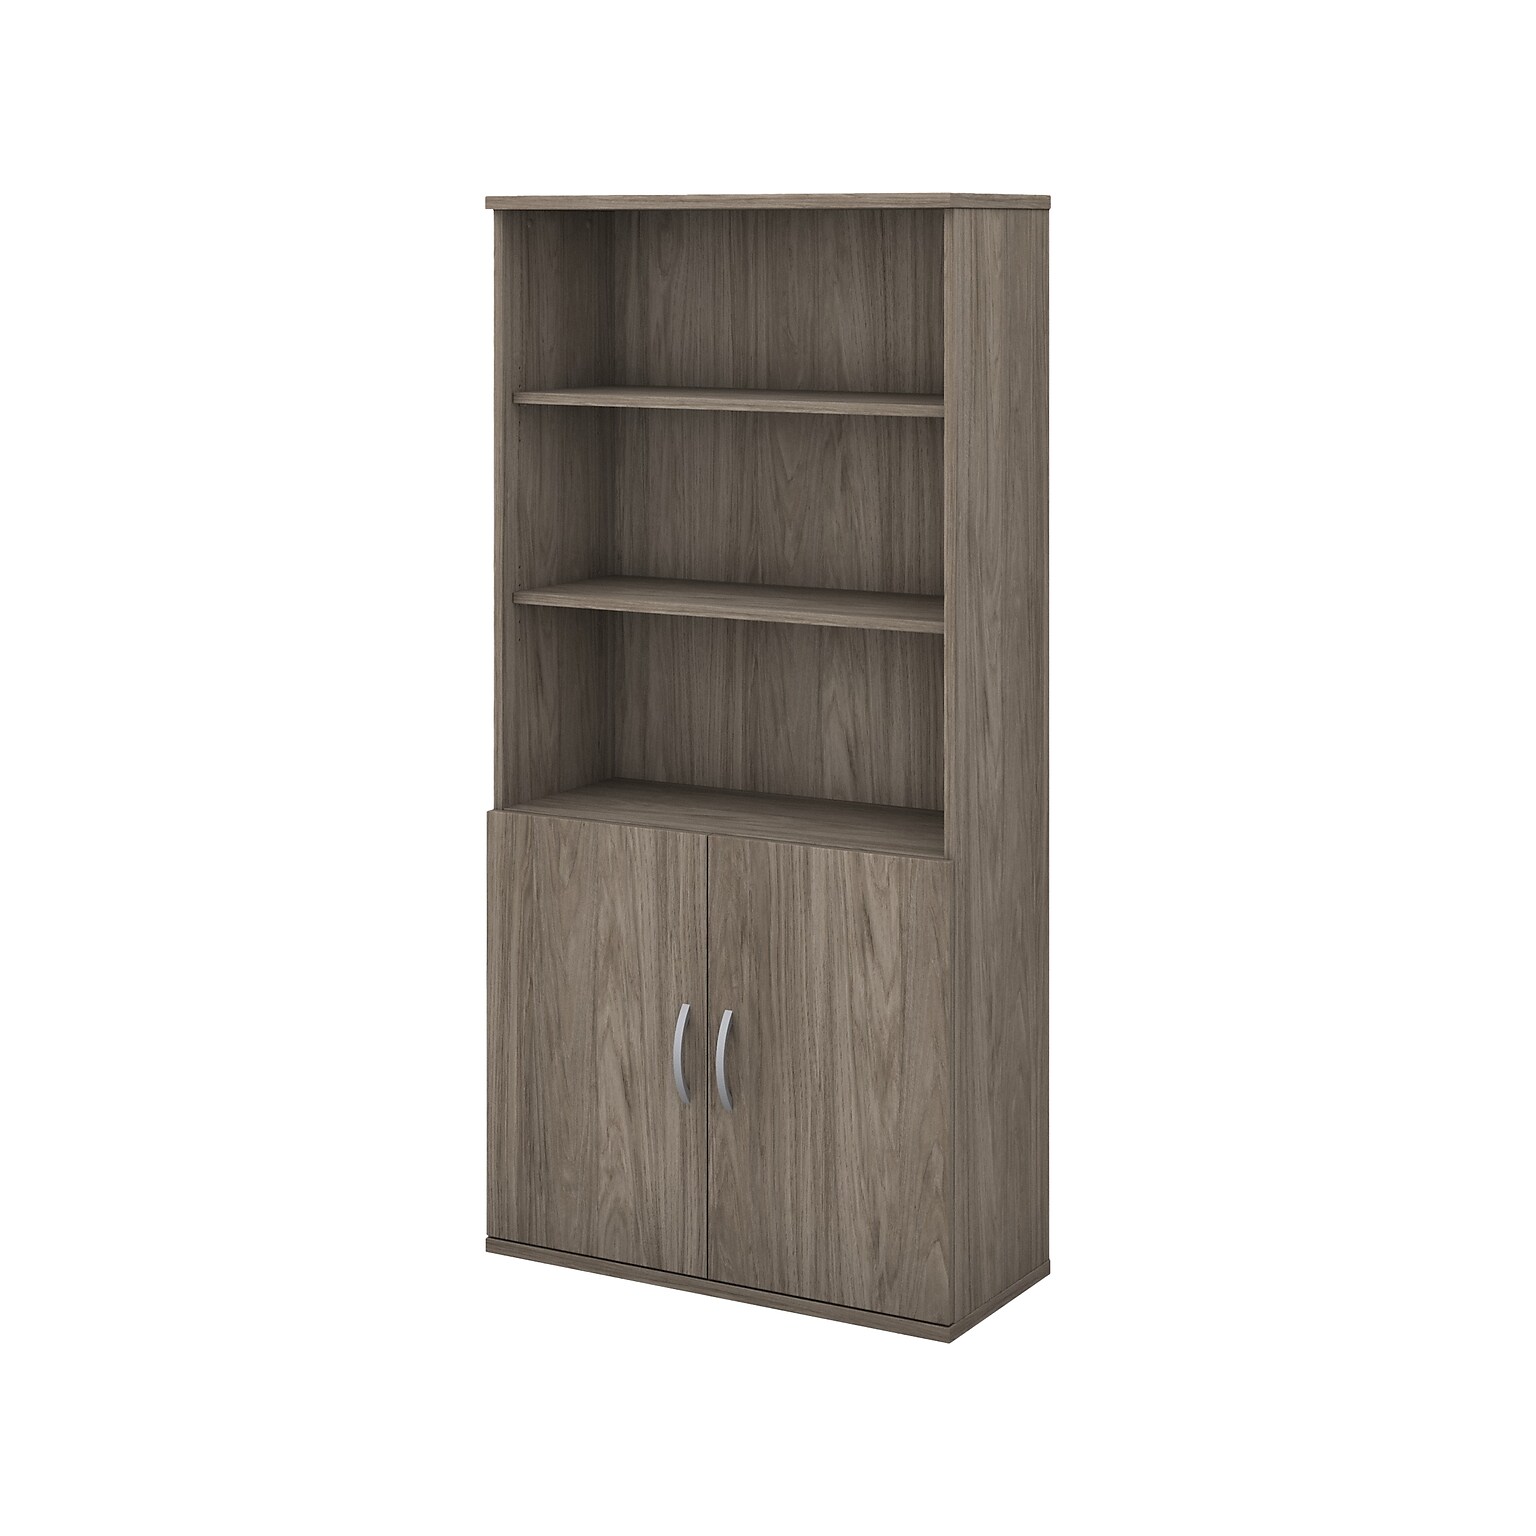 Bush Business Furniture Studio C 72.8H 5-Shelf Bookcase with Doors, Modern Hickory Laminated Wood (STC015MH)